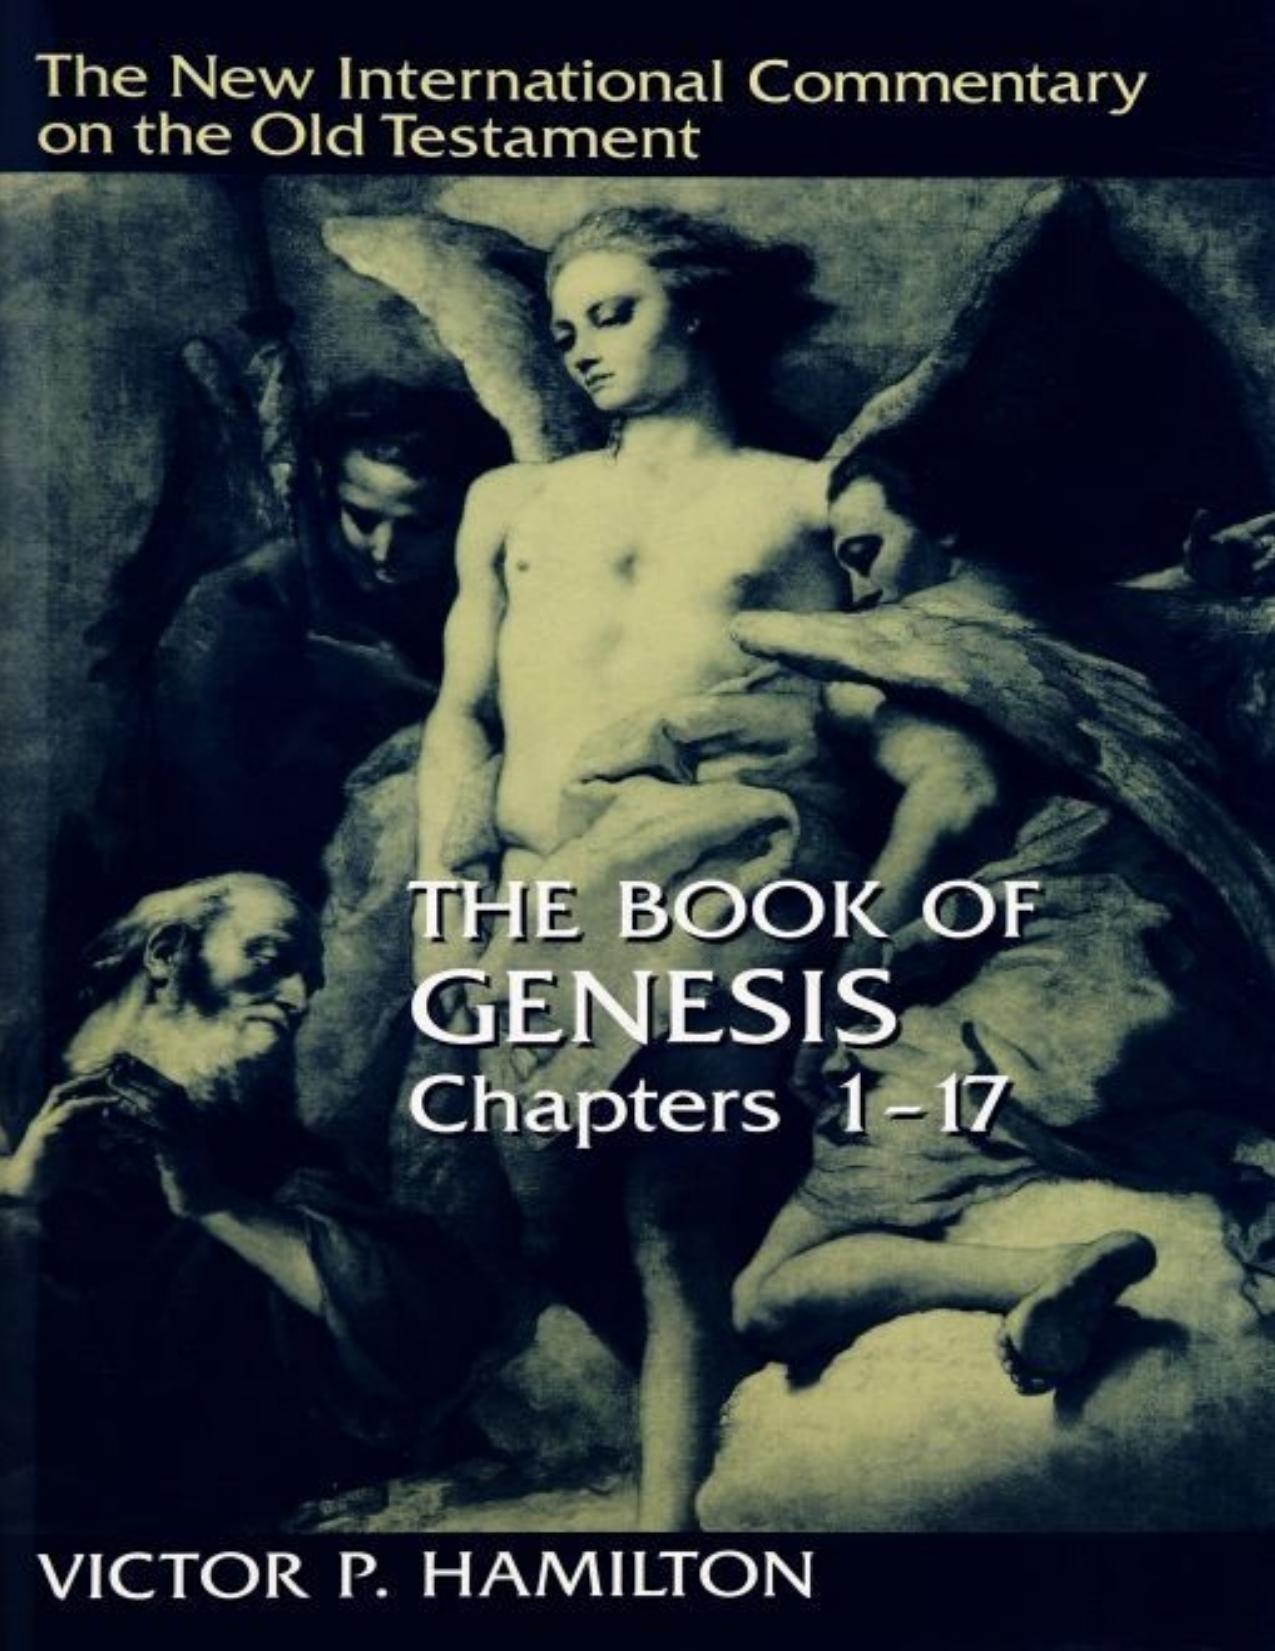 The Book of Genesis, Chapters 1-17 \(NICOT\) - PDFDrive.com